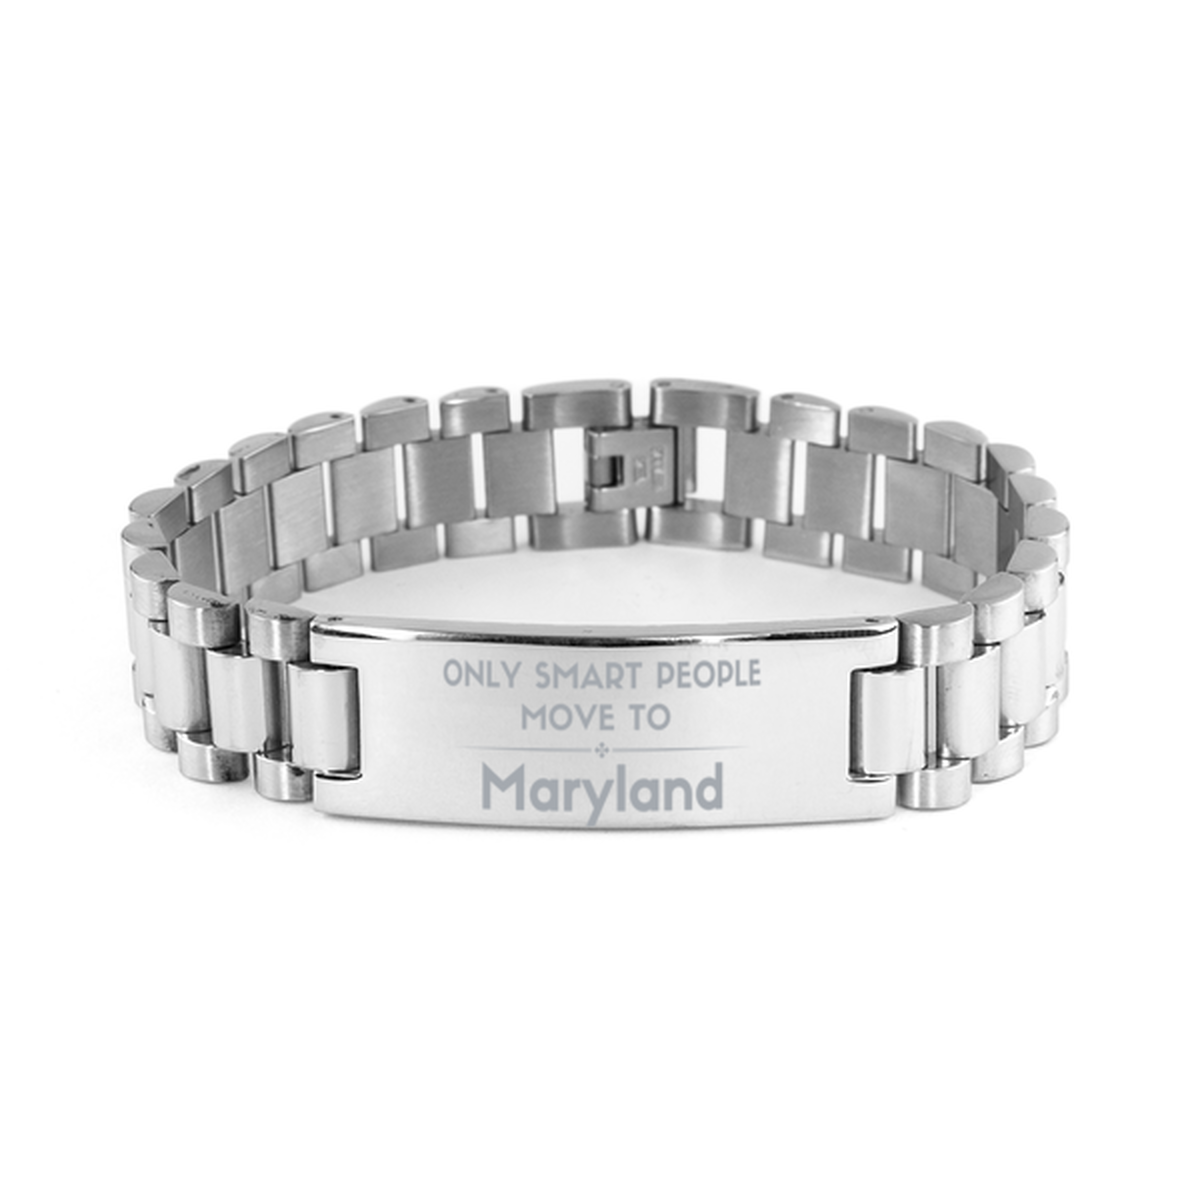 Only smart people move to Maryland Ladder Stainless Steel Bracelet, Gag Gifts For Maryland, Move to Maryland Gifts for Friends Coworker Funny Saying Quote